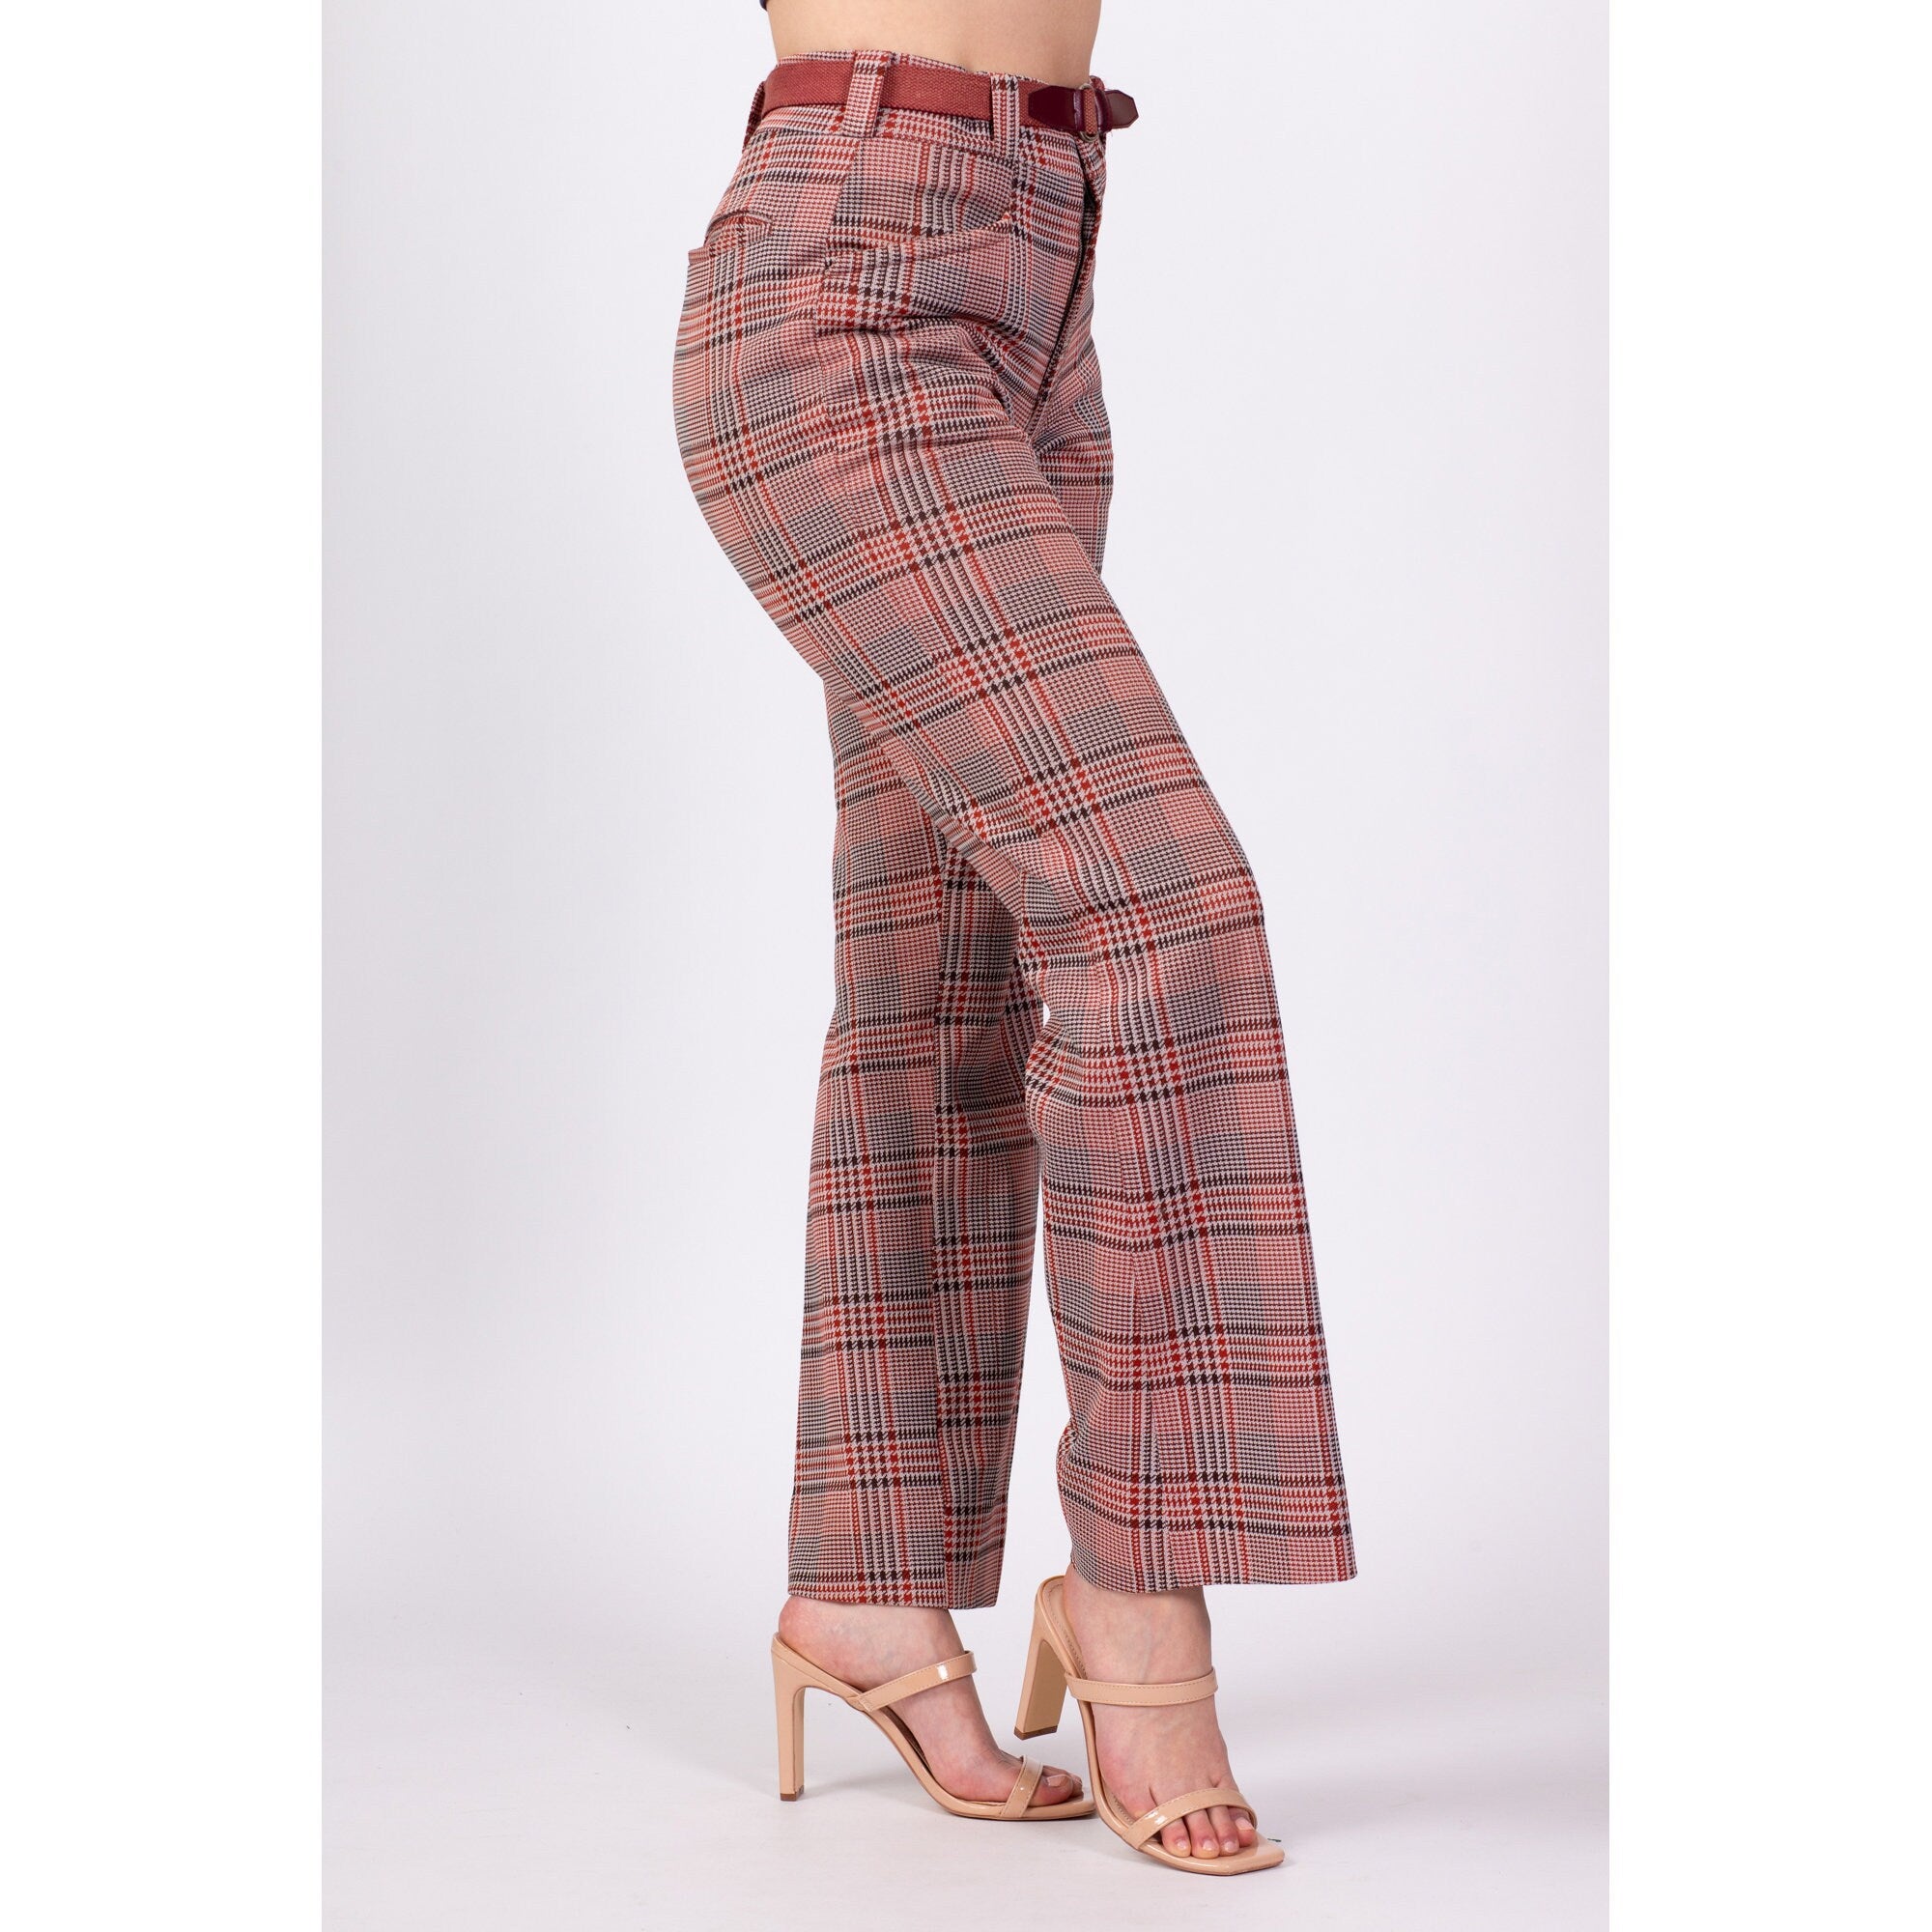 Oversized Red Plaid Mid Waist Running Pants Women For Women Straight, Loose  Fitting, Lace Up, And Sweat Wicking Streetwear Fashion 210517 From Luo04,  $16.47 | DHgate.Com